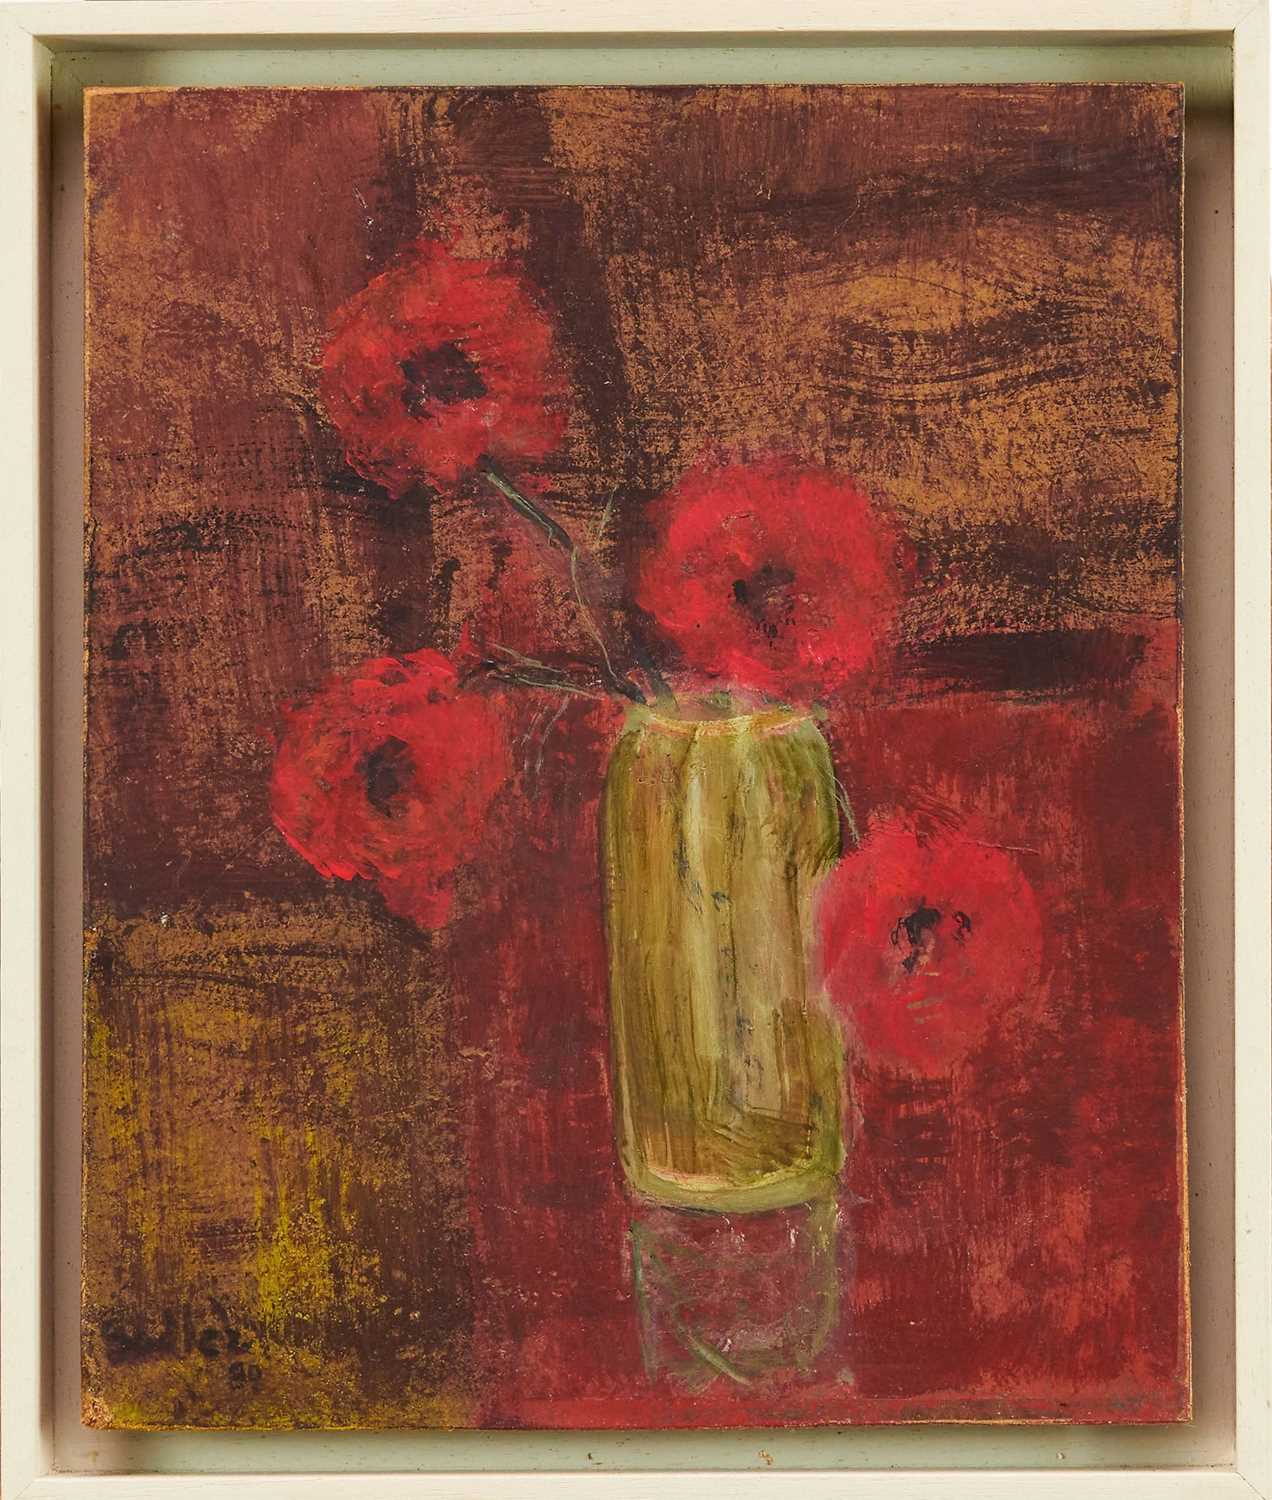 Lot 989 - *Robert Sadler (1909-2001) Still Life, "Poppies no 8", 1989, acrylic on board, signed and dated, 30.5 x 25cm, framed